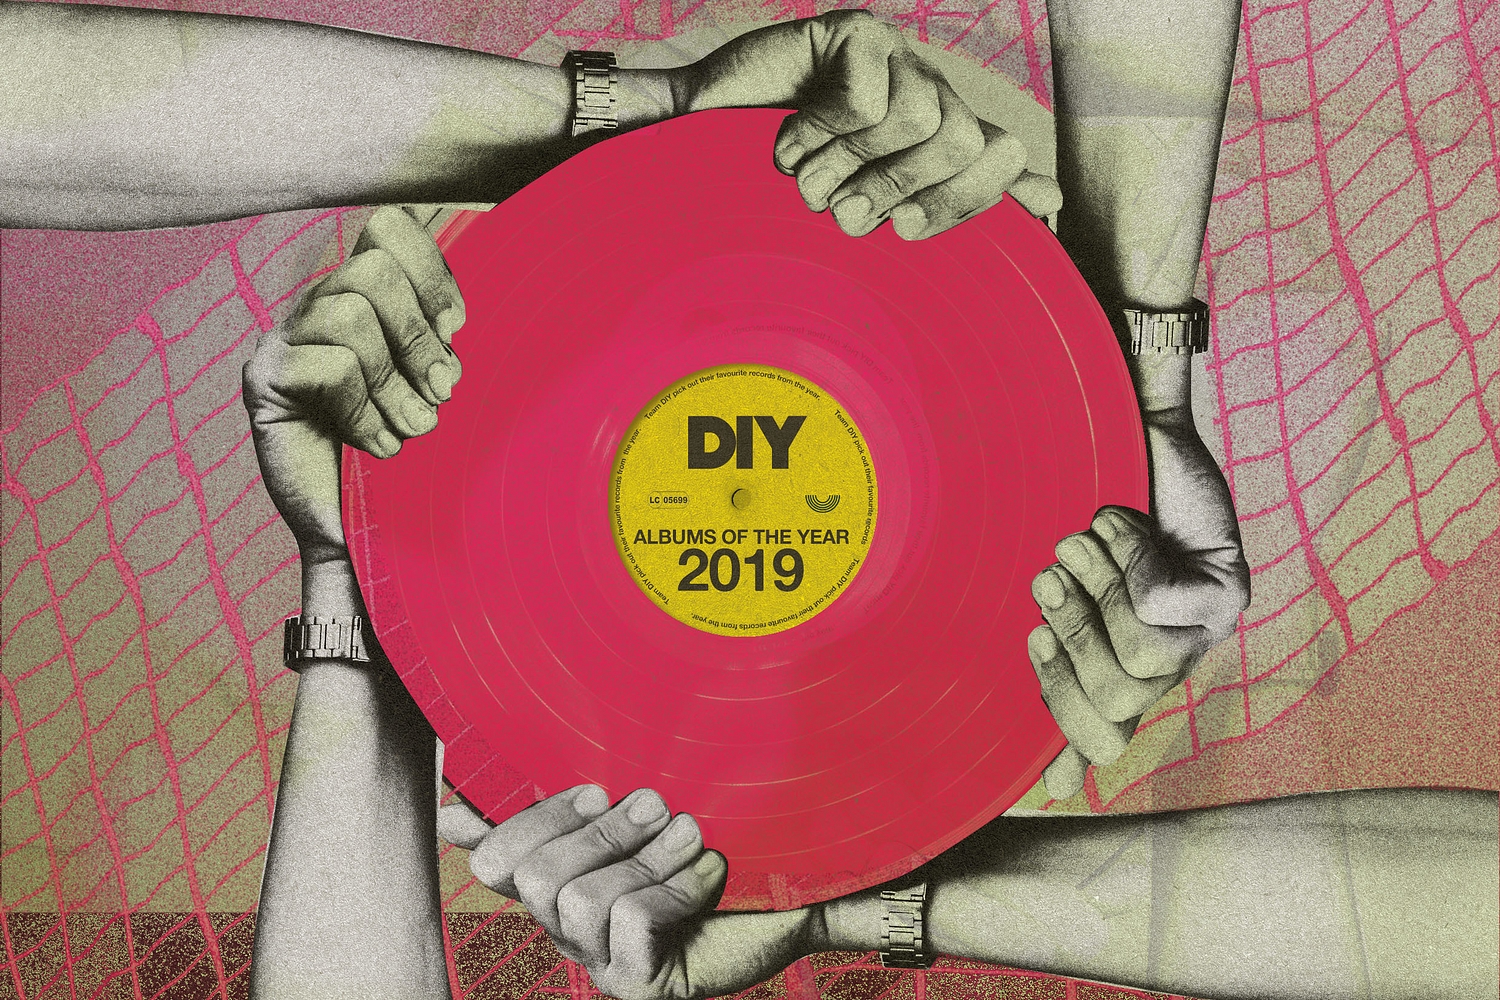 DIY’s Albums of the Year 2019